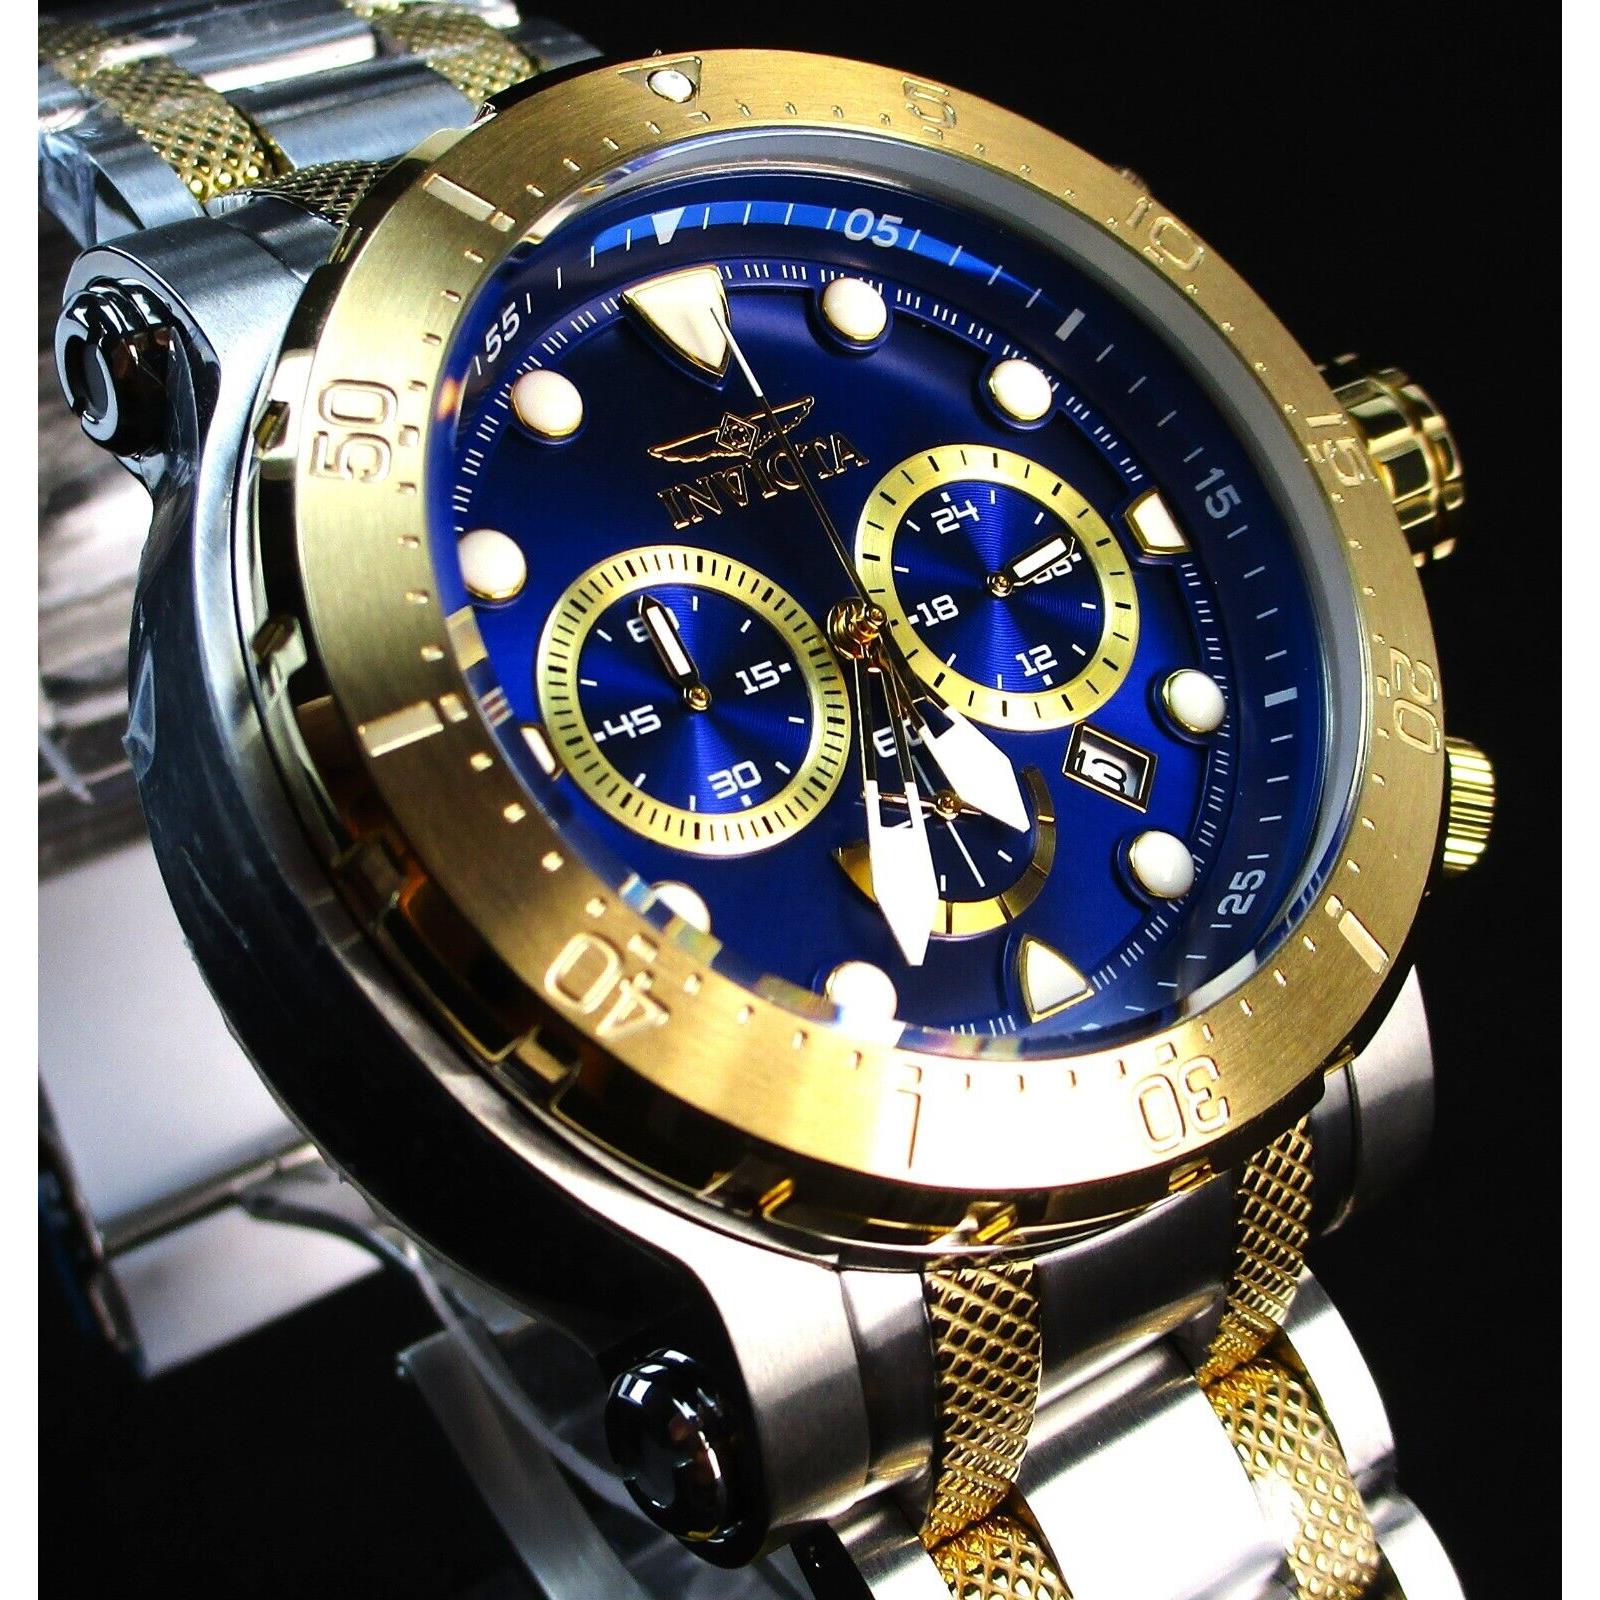 Invicta watch Coalition Forces - Blue Dial, Stainless Steel w/Gold Band, Gold Bezel